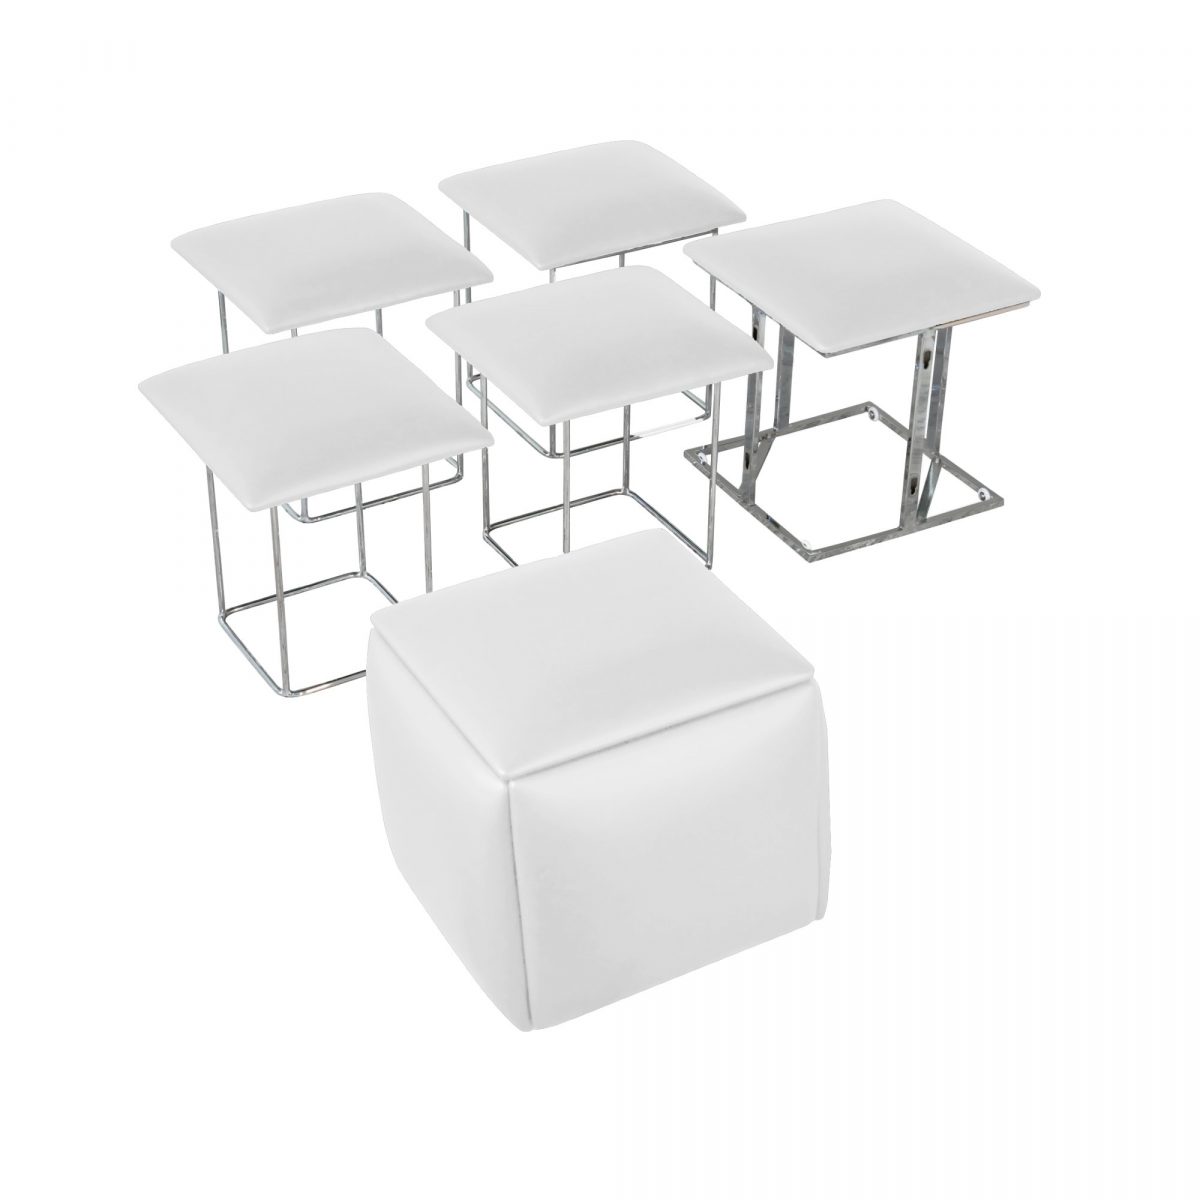 5 chairs in one cube